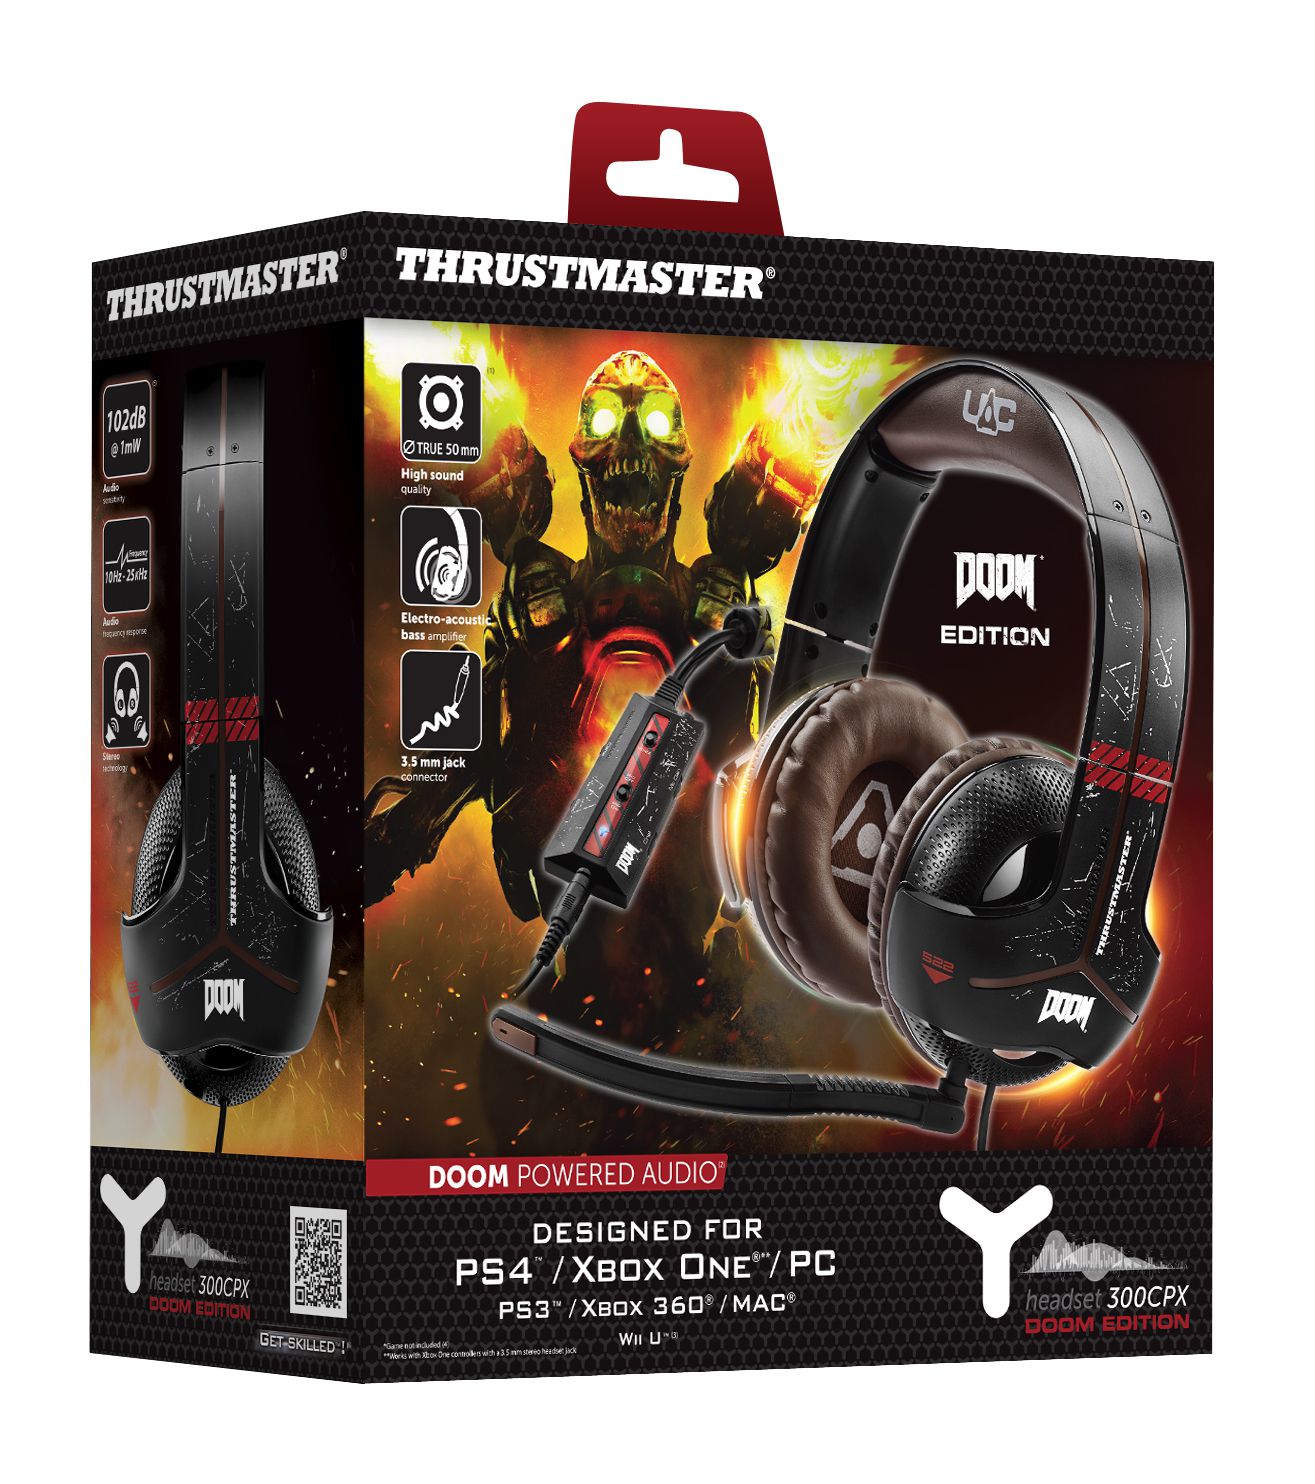 Thrustmaster Y300CPX Gaming Headse.